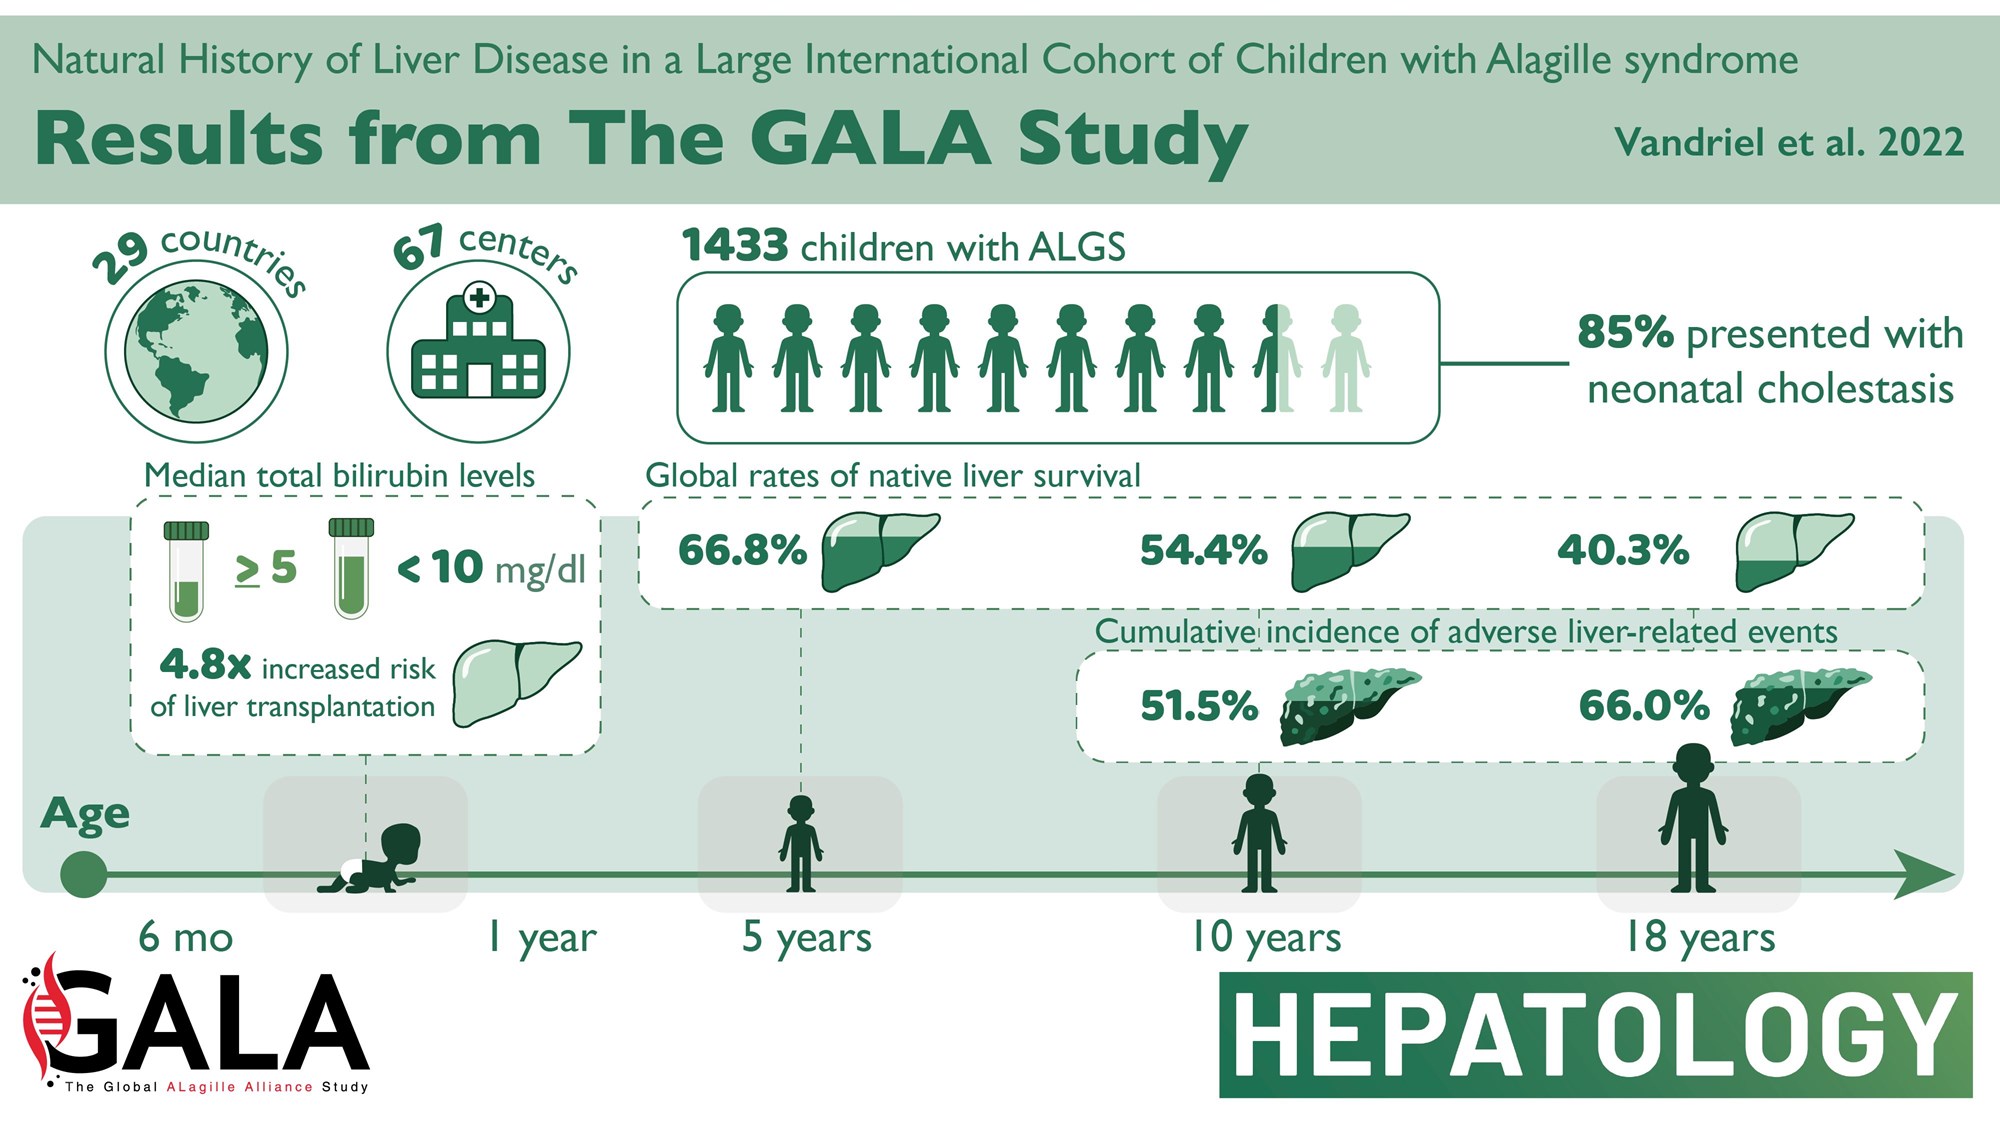 Graphic visualizing the results form the GALA Study of Alagille Syndrome. A summary of the results can be found in the body text.